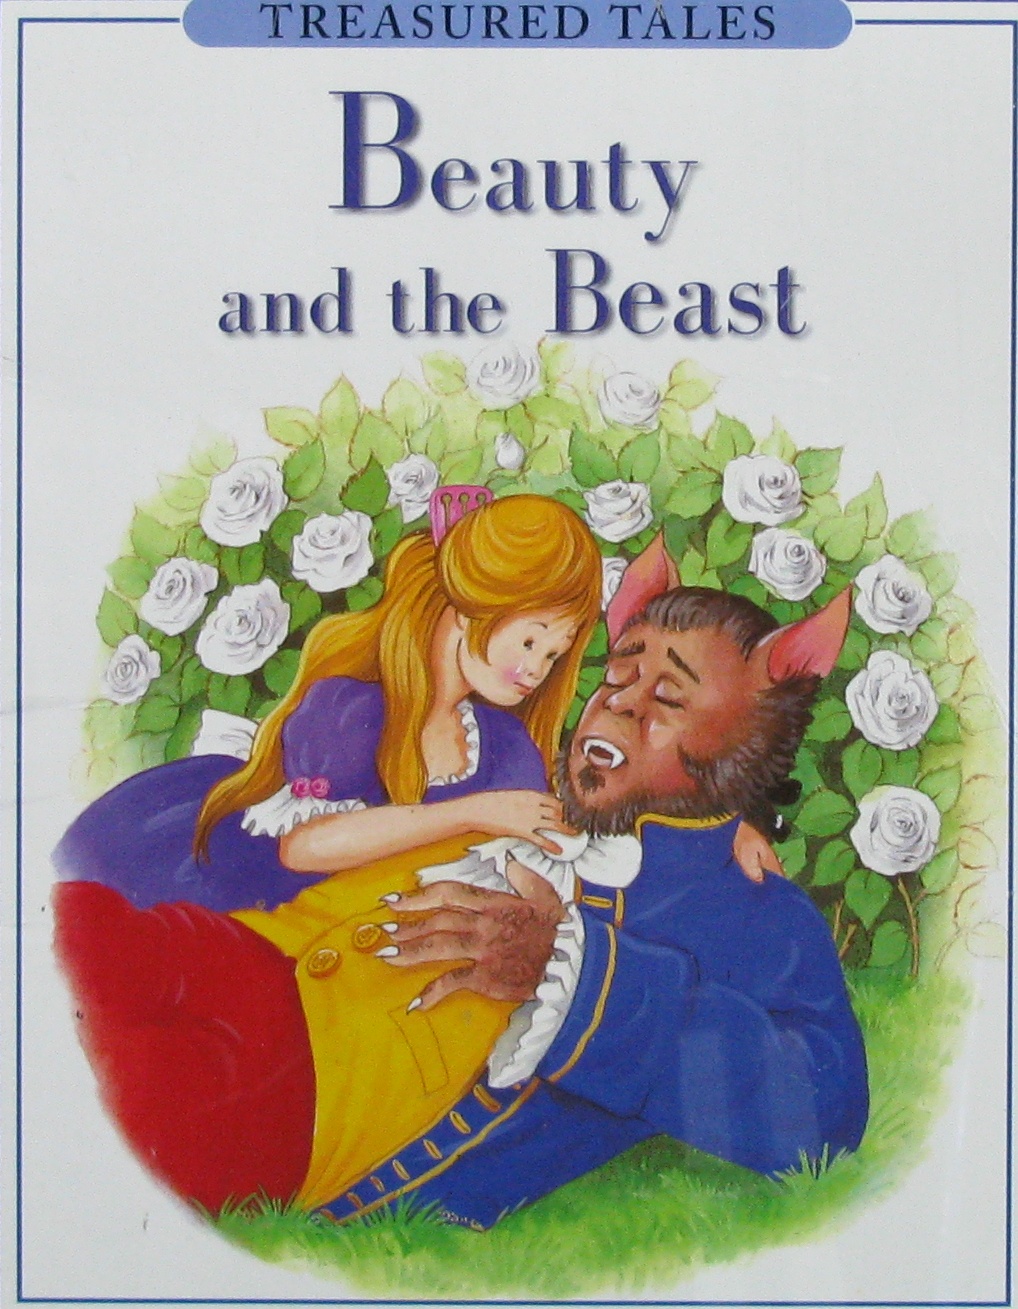 treasured tales: beauty and the beast